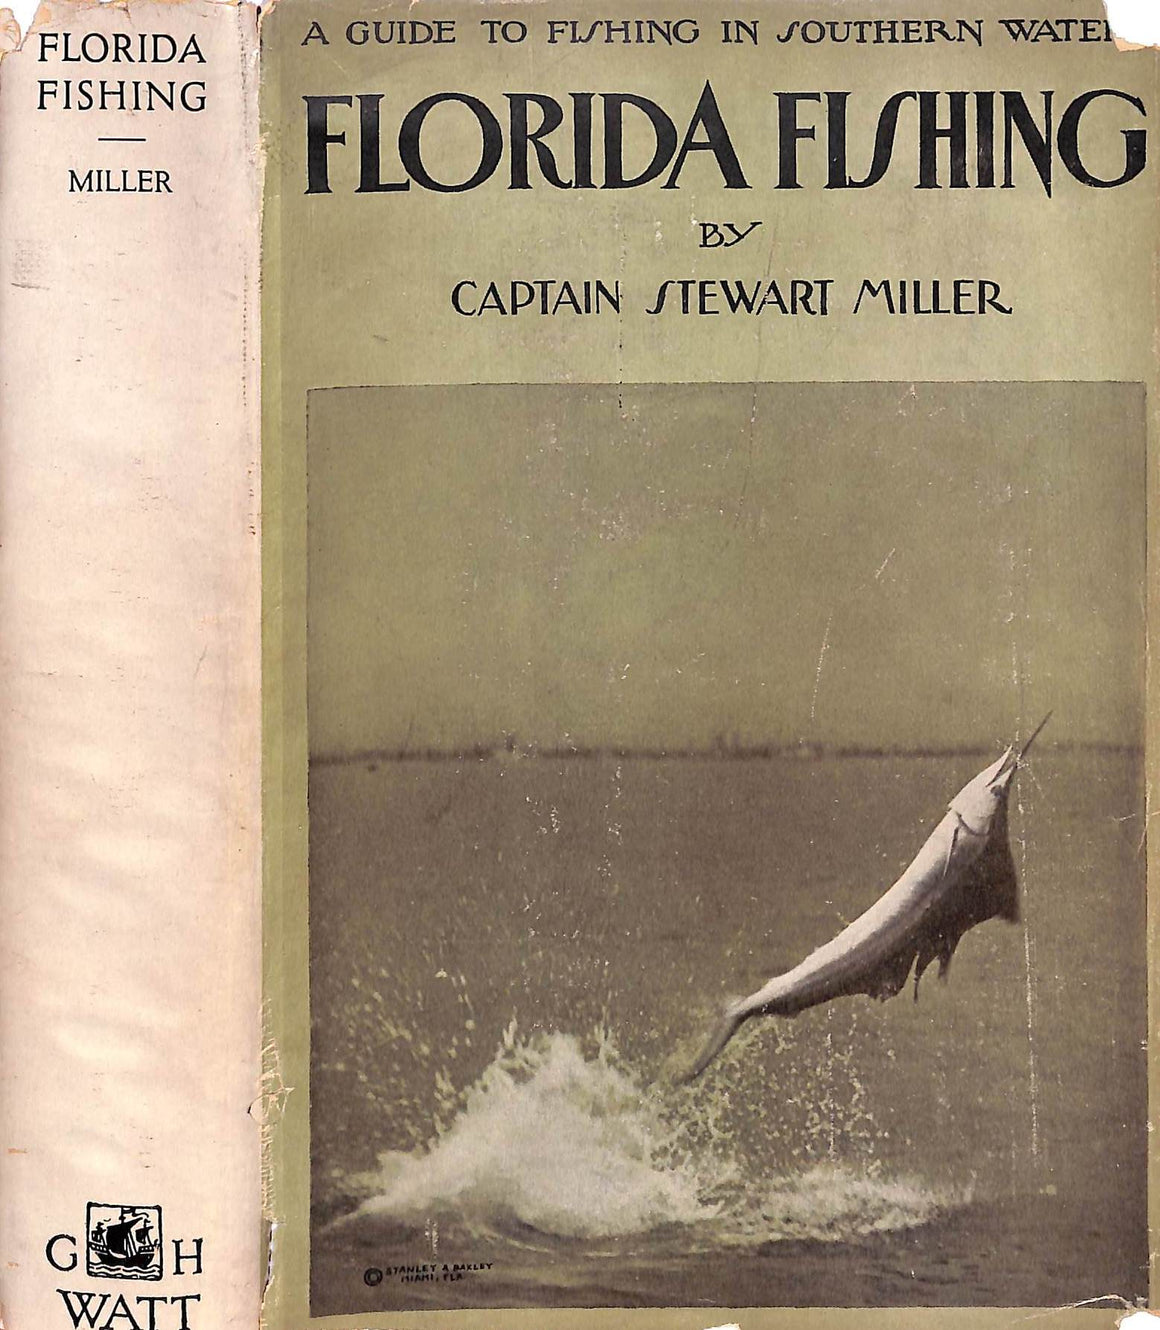 "Florida Fishing A Guide To Fishing In Southern Waters" 1931 MILLER, Captain Stewart